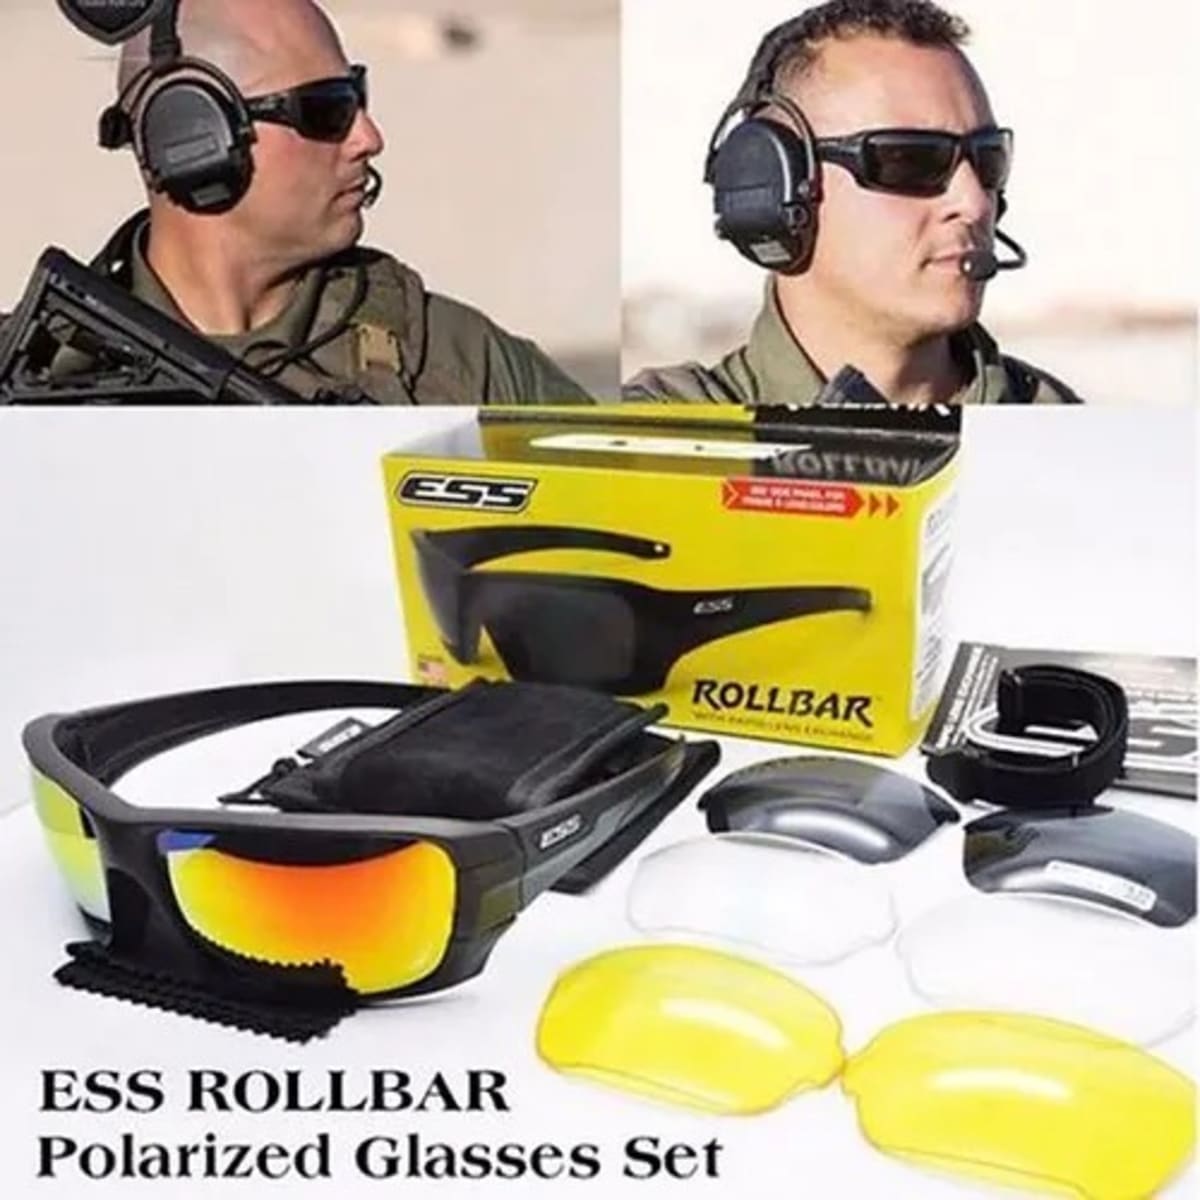 ESS Rollbar Polarized Tactical Sunglasses - Uv Protection Military Goggles  Tr90 Armygoogle - 4lens